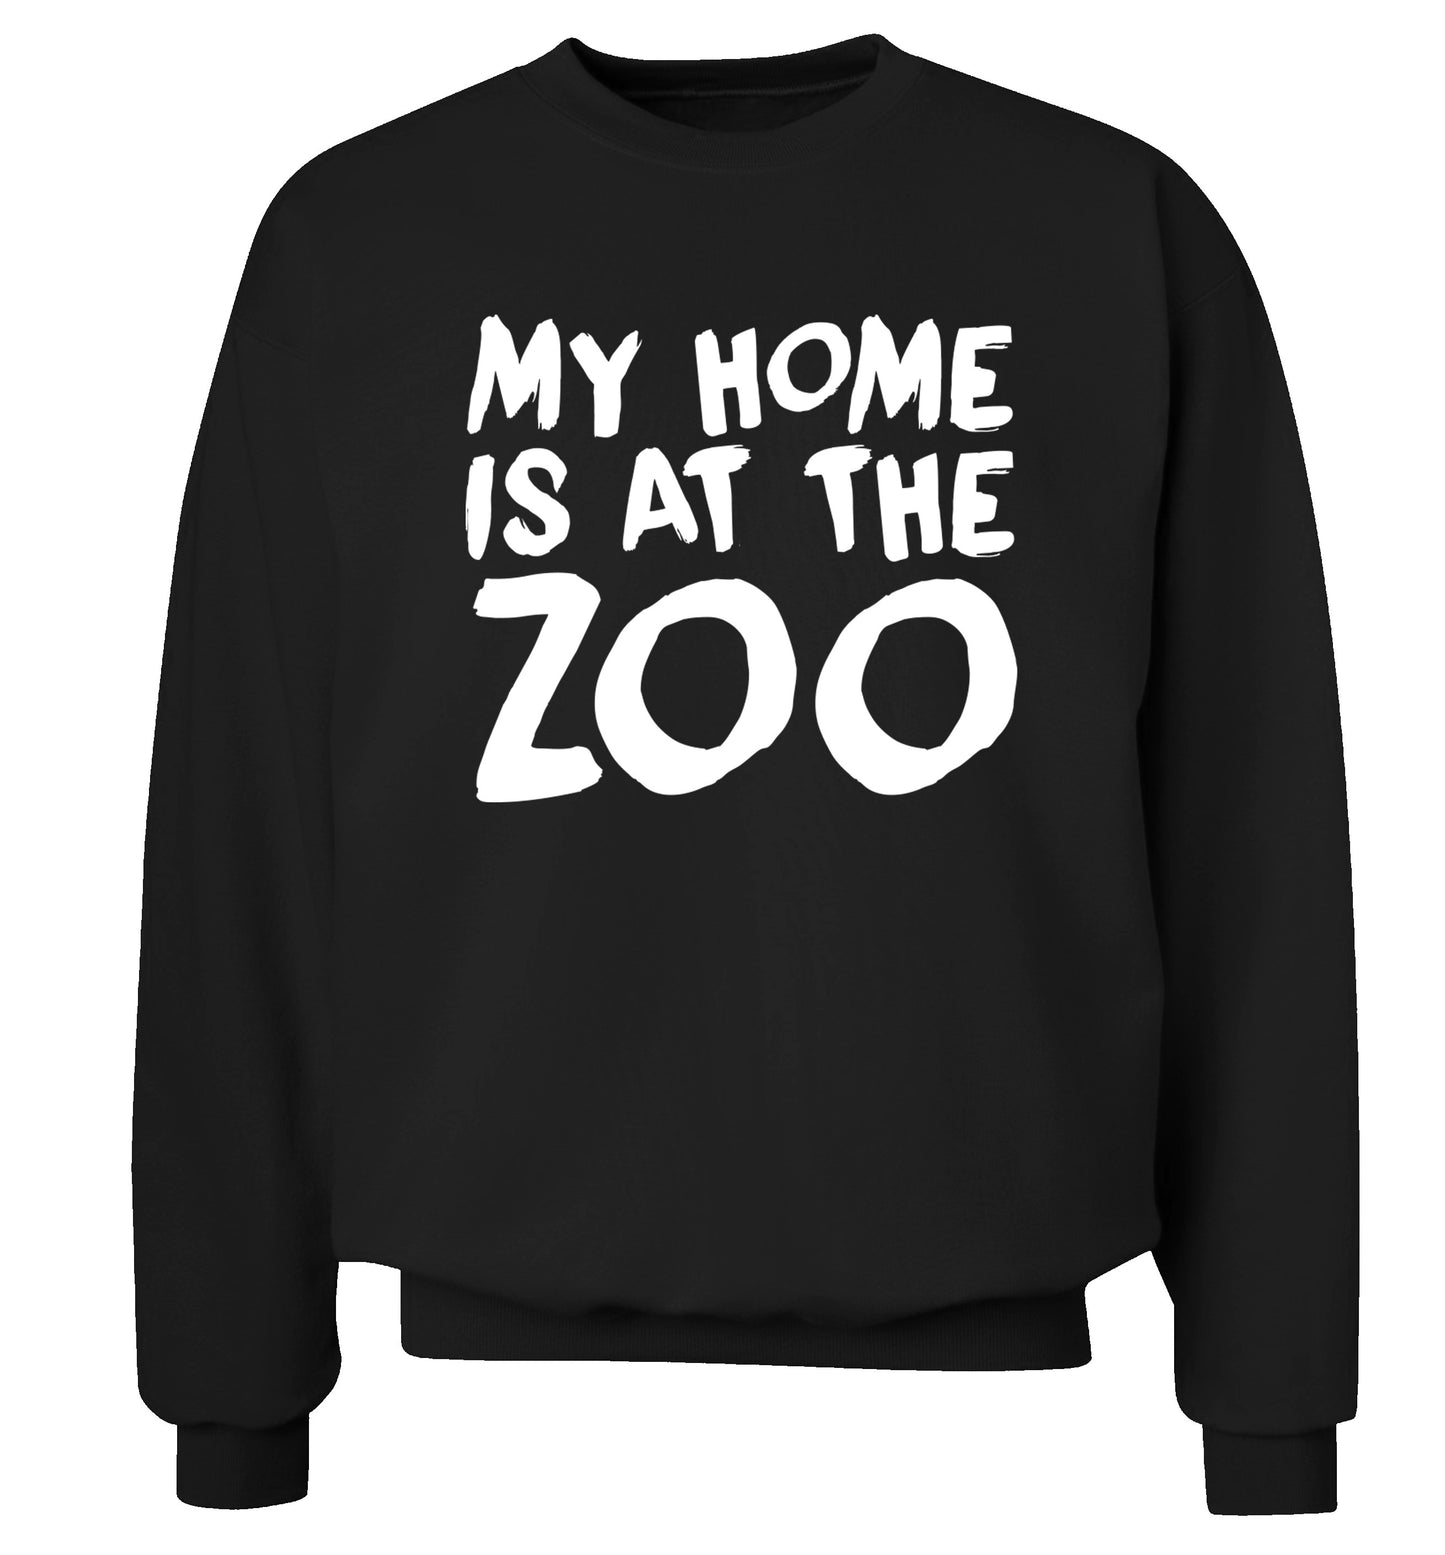 My home is at the zoo Adult's unisex black Sweater 2XL